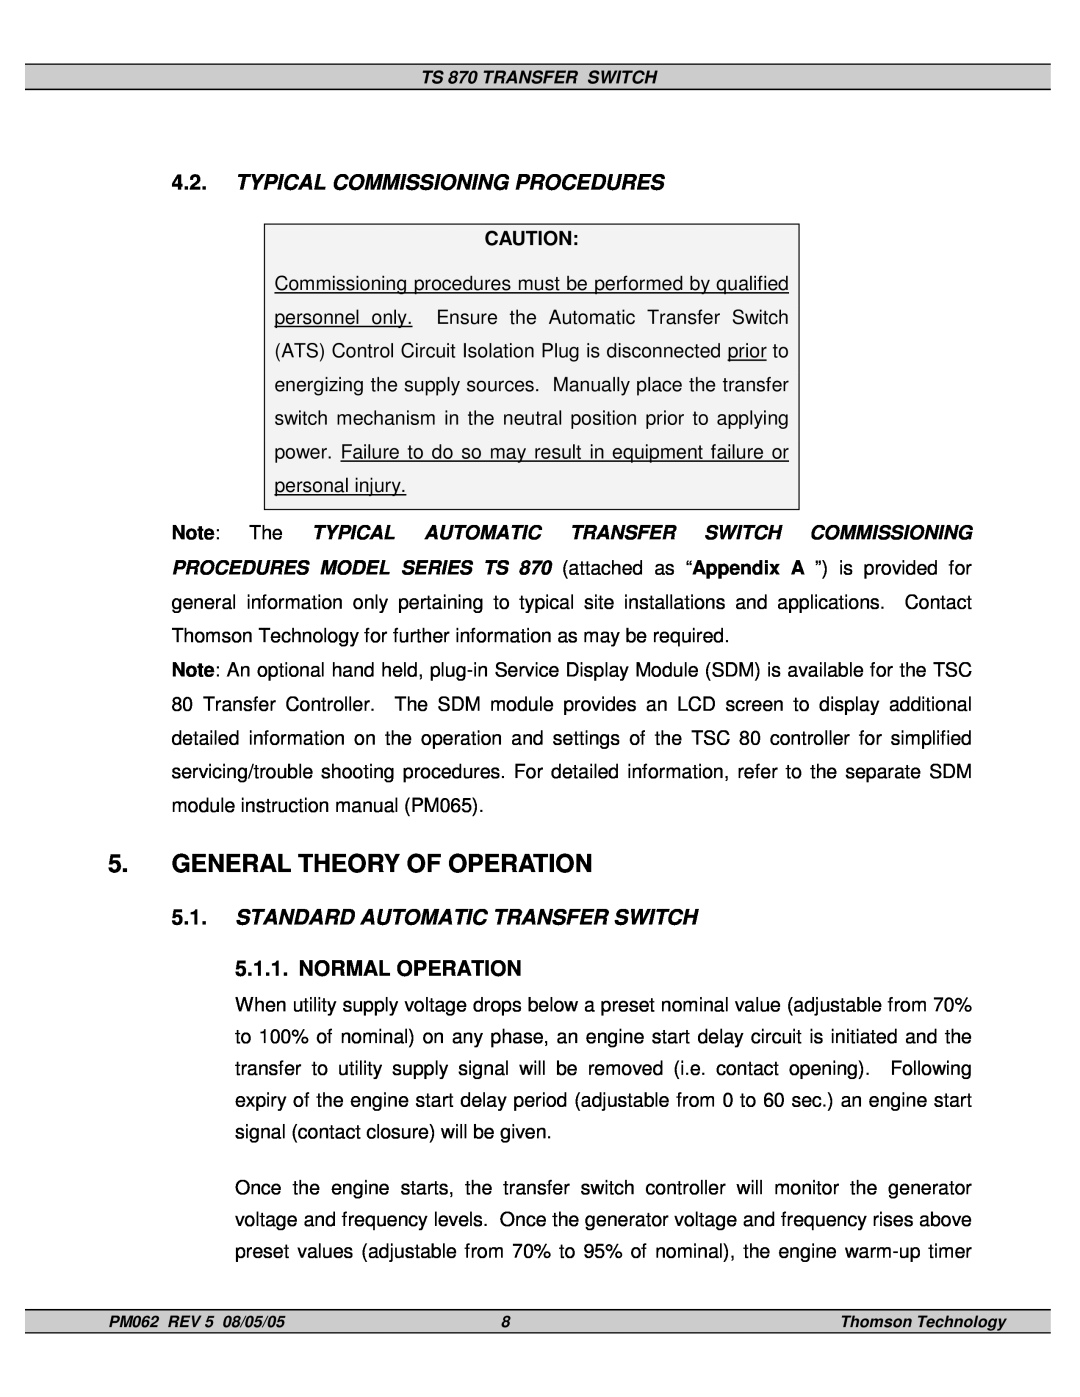 Technicolor - Thomson TS 870 service manual General Theory Of Operation, Typical Commissioning Procedures, Normal Operation 